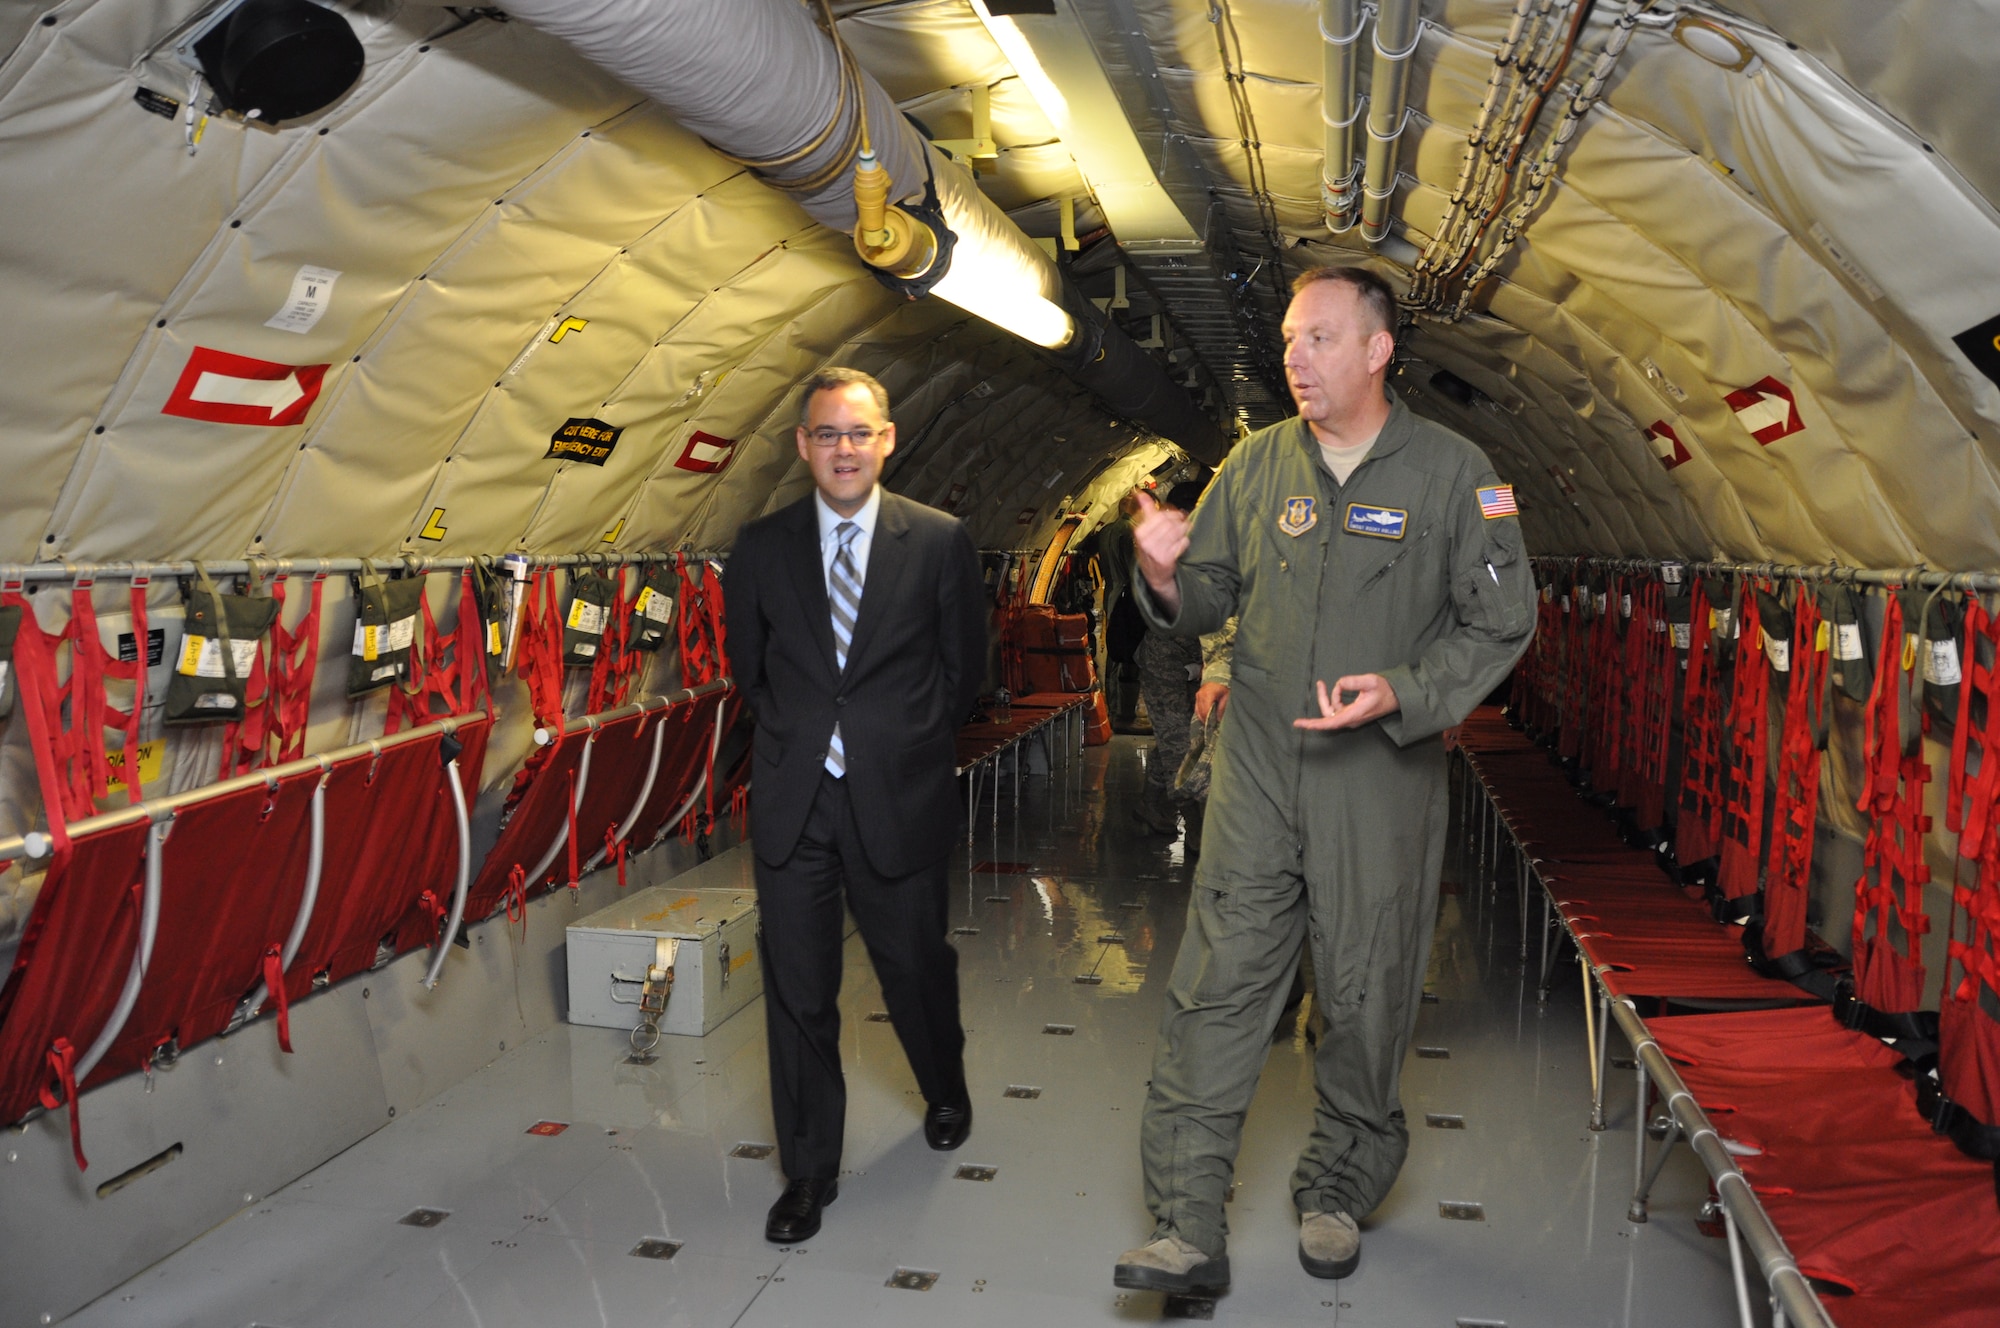 Air Force Chief Master Sgt. Frankie Rollins, a boom operator for the 756th Air Refueling Squadron, walks with Mr. Daniel Ginsberg, Assistant Secretary of the Air Force for Manpower and Reserve Affairs, Washington, D.C., inside a KC-135 Stratotanker and explains the capabilities of the aircraft during a visit to the 459th Air Refueling Wing at Joint Base Andrews, Md., May 17, 2013. Ginsberg visited the wing to interact with the Airmen and answer questions regarding manpower issues. (U.S. Air Force photo/ Staff Sgt. Katie Spencer)